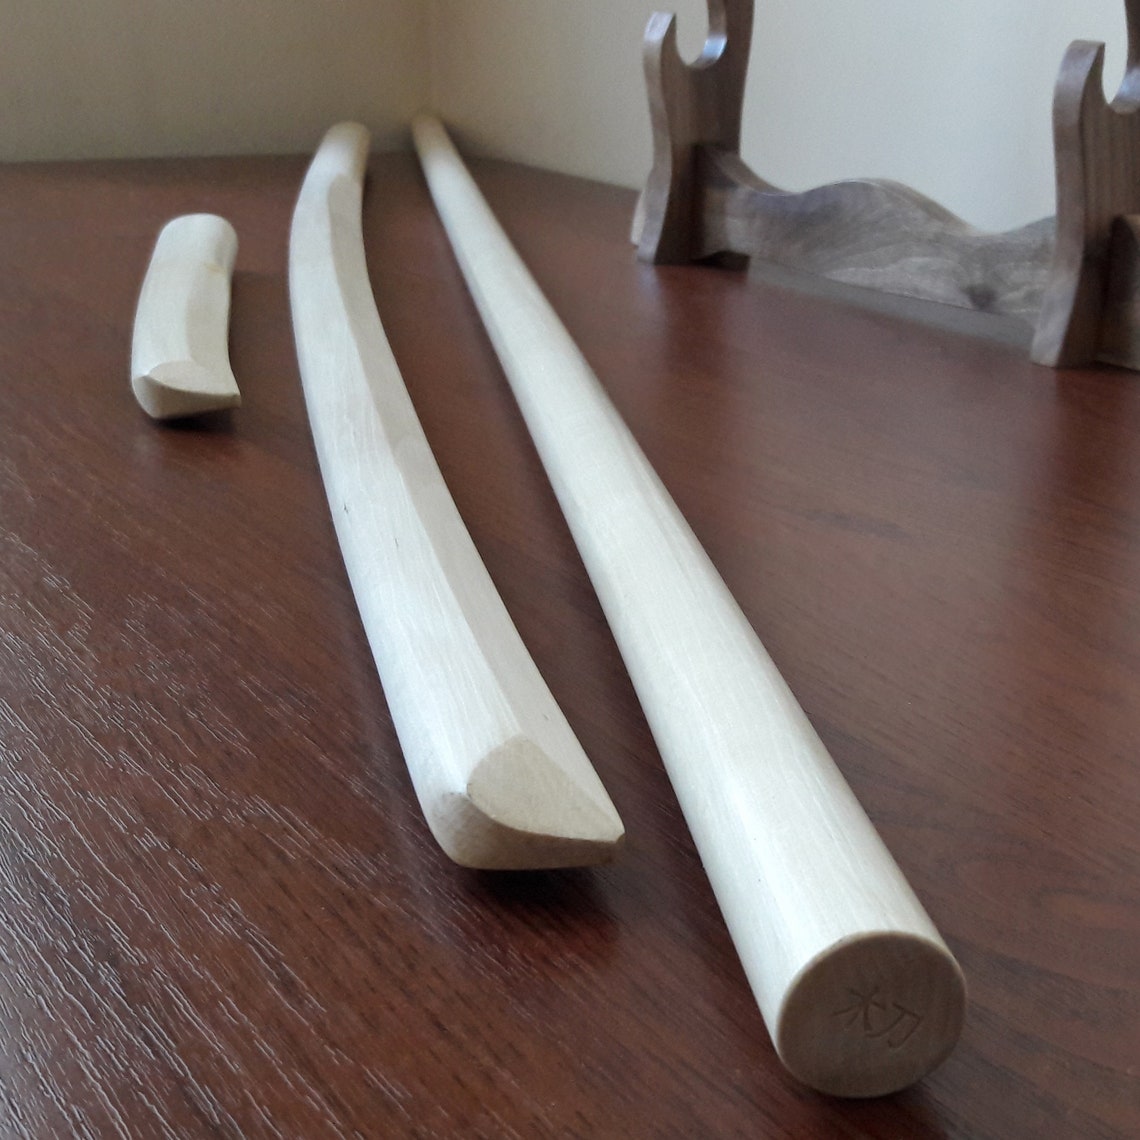 A Set of Wooden Weapons for Aikido Bokken Daito-ryu, Jo, Tanto From Ash and  a Bag for Carrying and Storage. -  Hong Kong